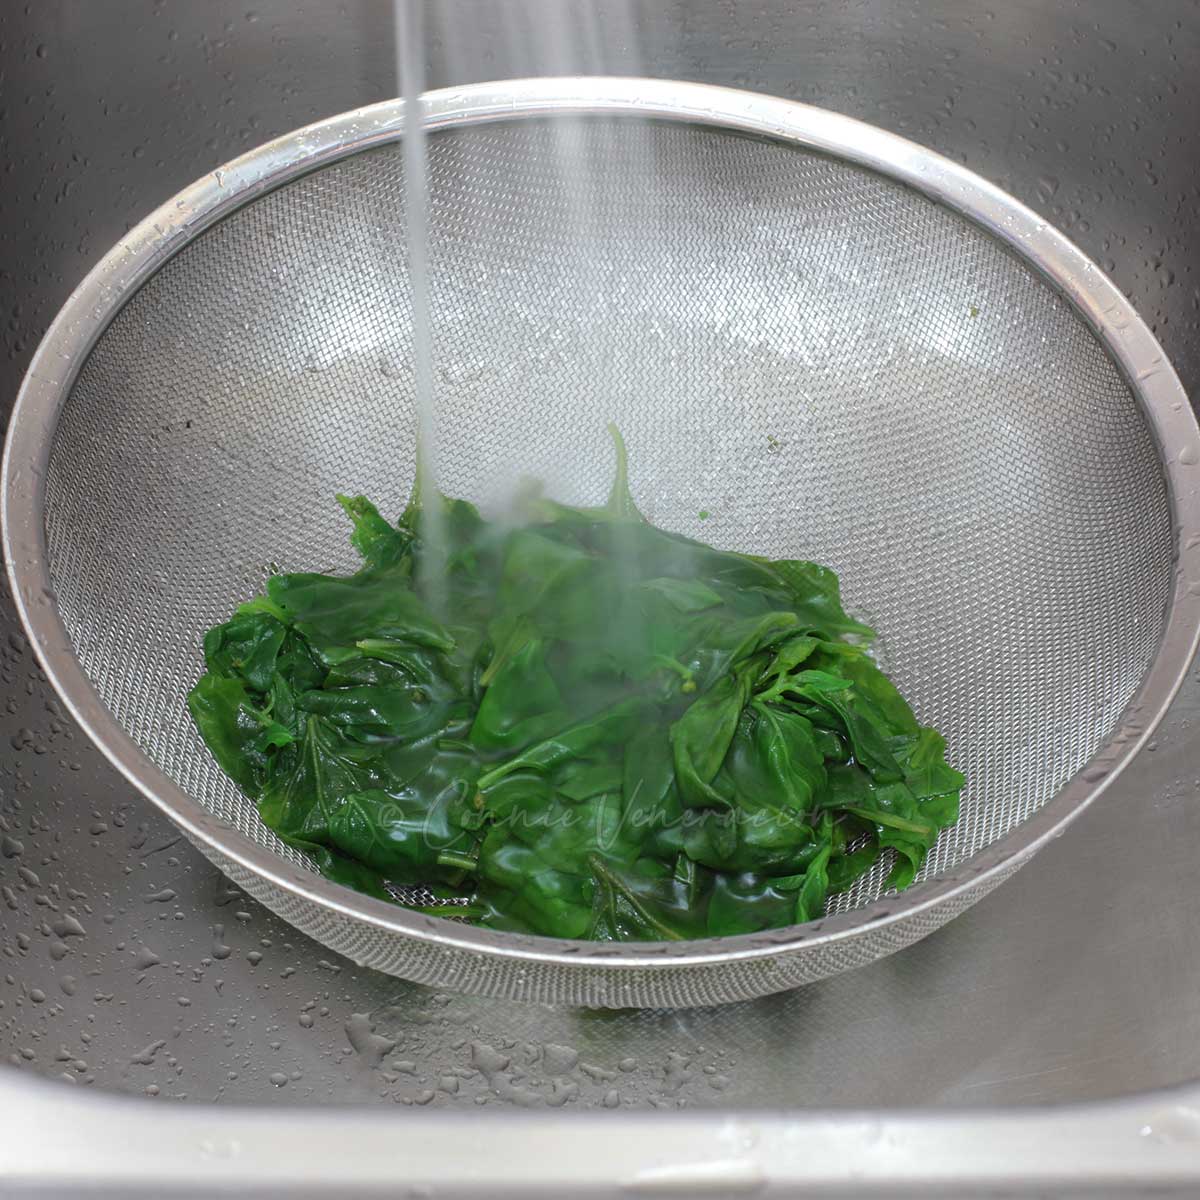 Rinsing blanched spinach